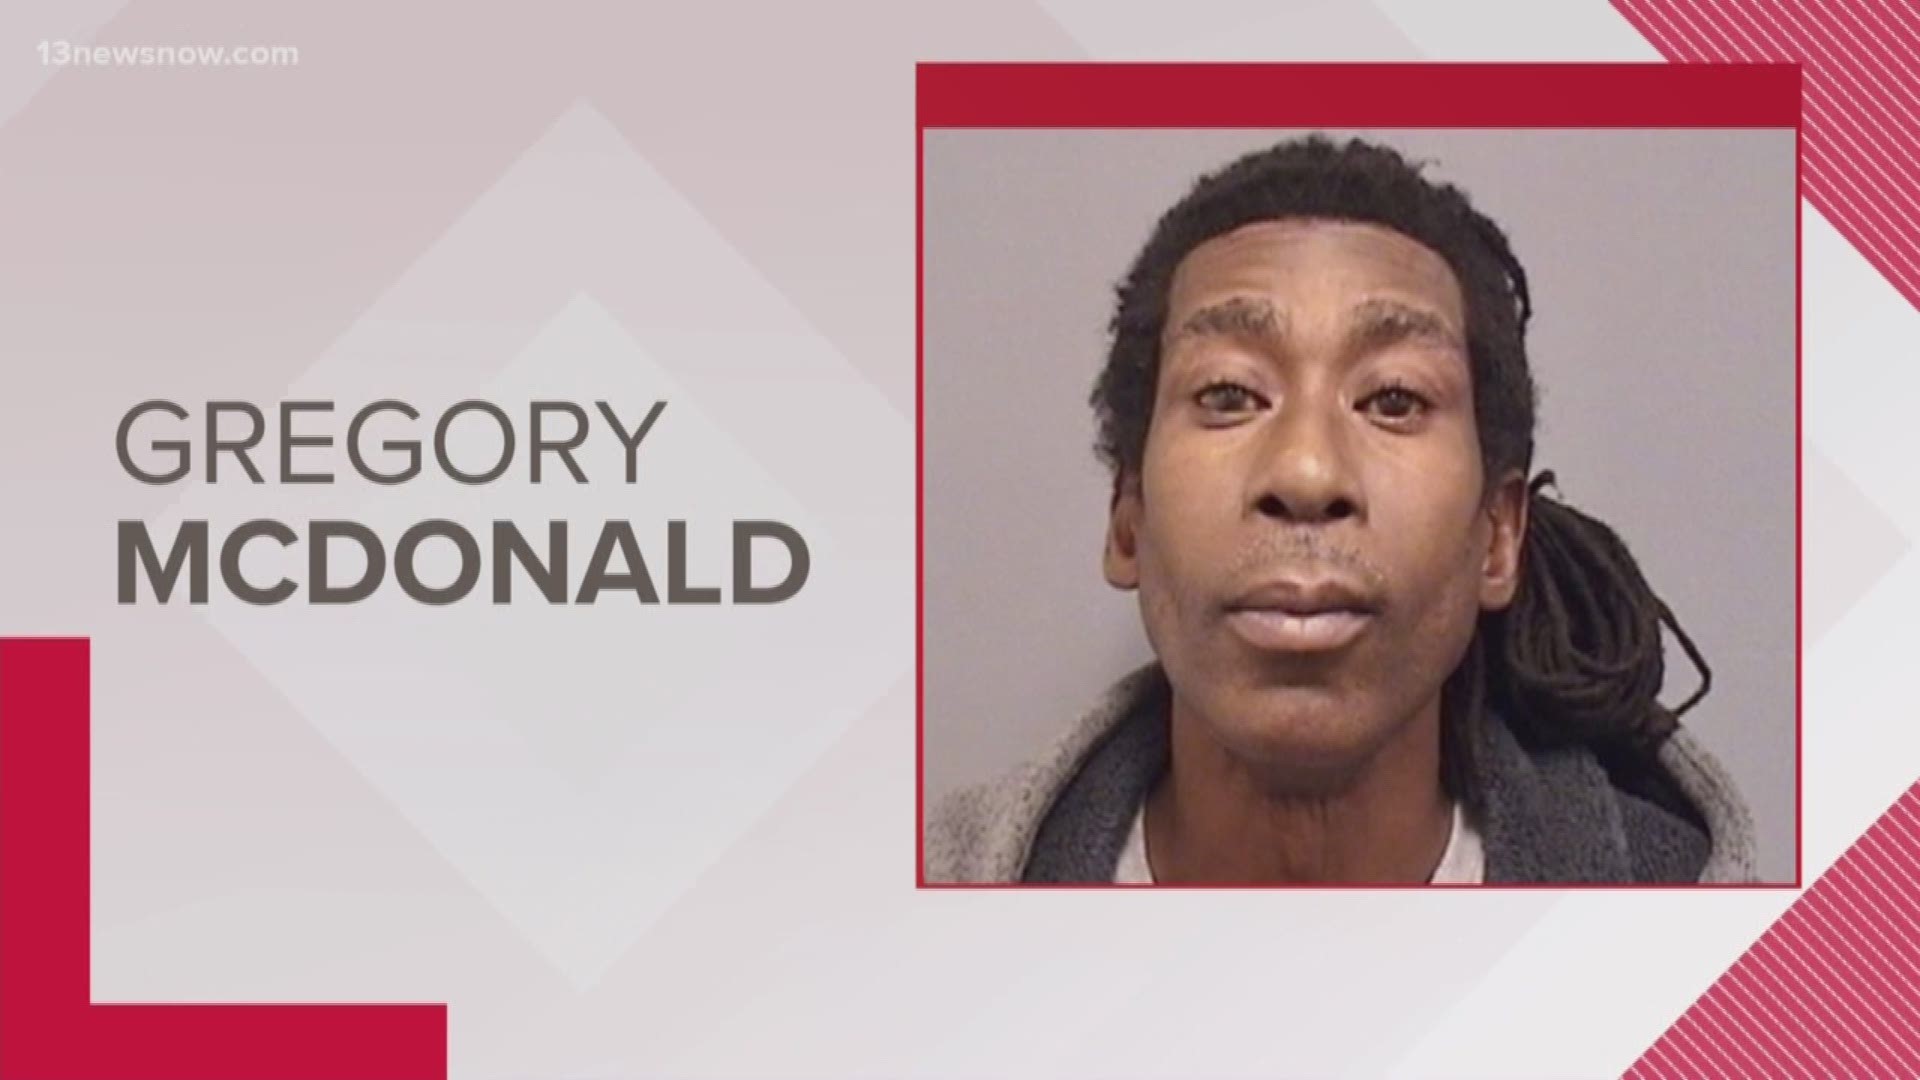 Gregory McDonald faces second-degree murder charges after allegedly stabbing someone to death on Bluestone Avenue in Norfolk.